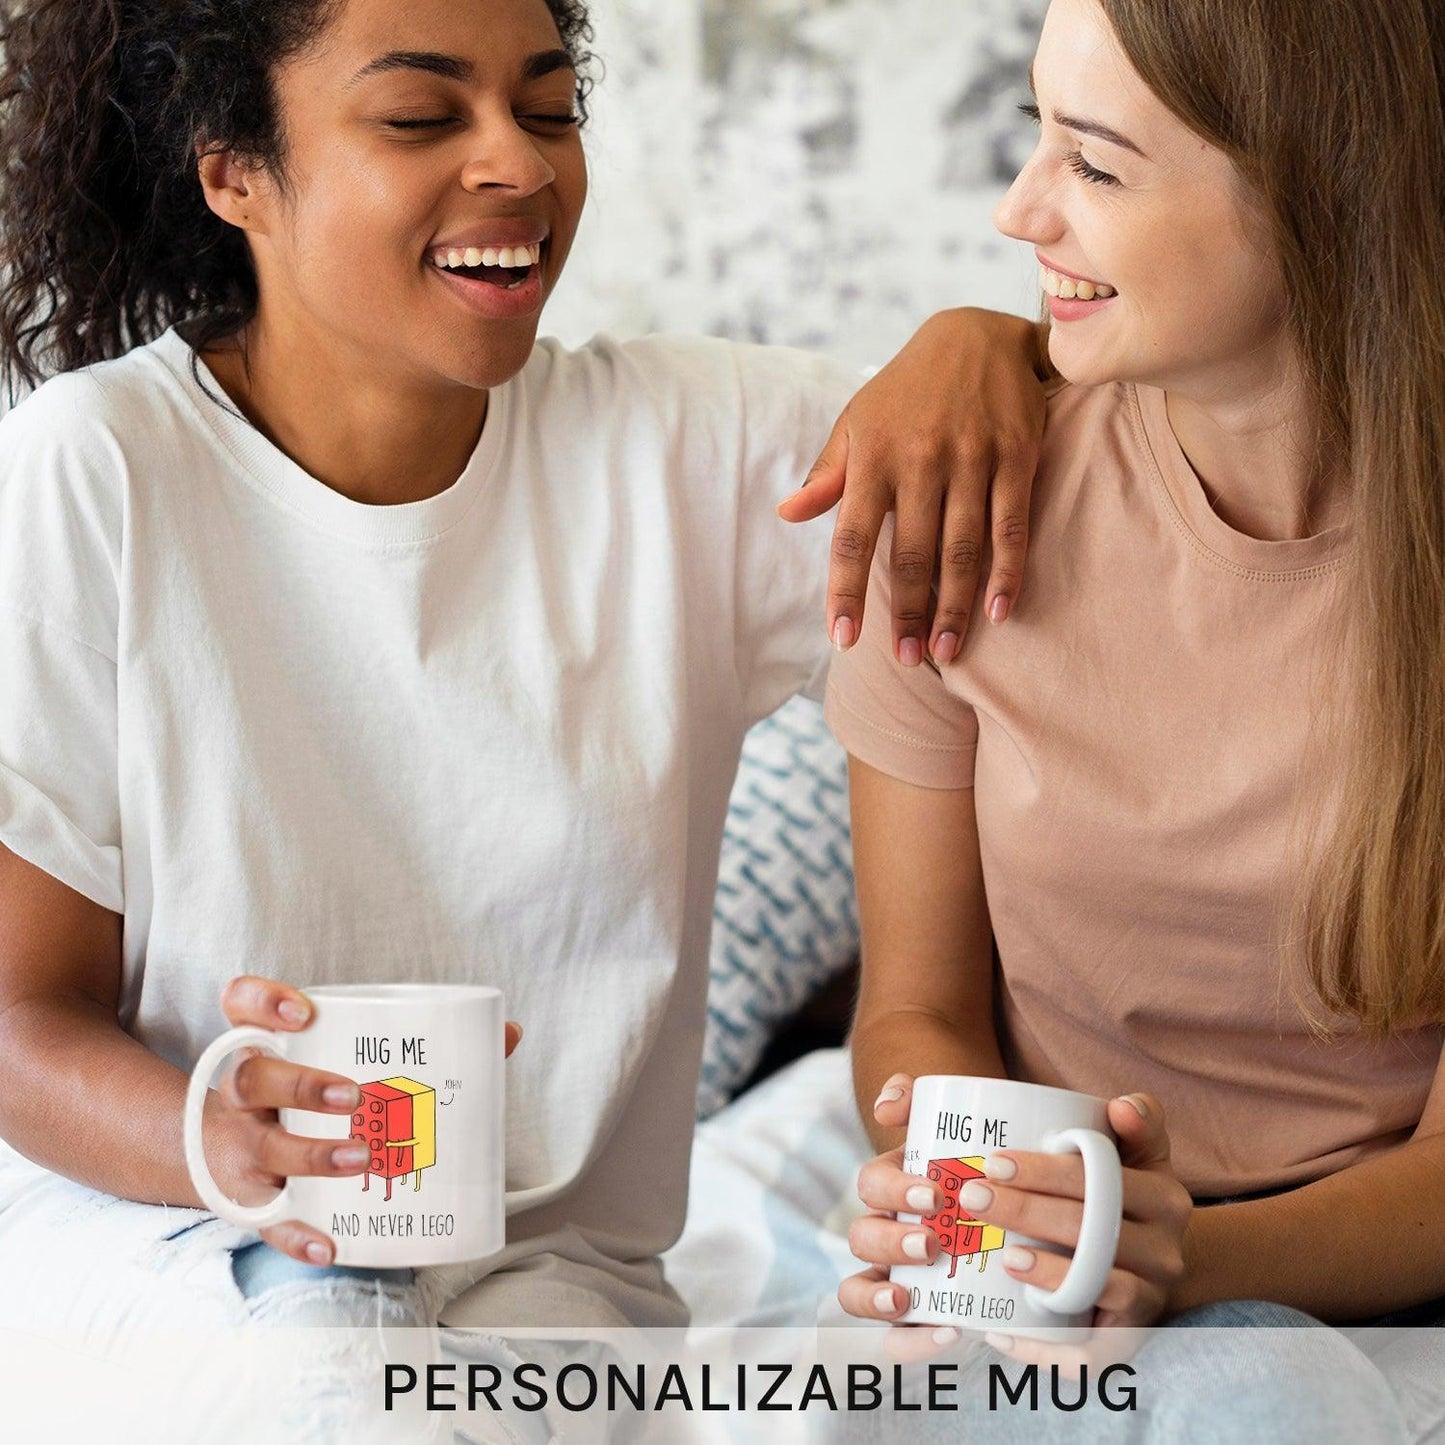 Hug Me And Never Lego - Personalized Anniversary or Valentine's Day gift for Boyfriend or Girlfriend - Custom Mug - MyMindfulGifts